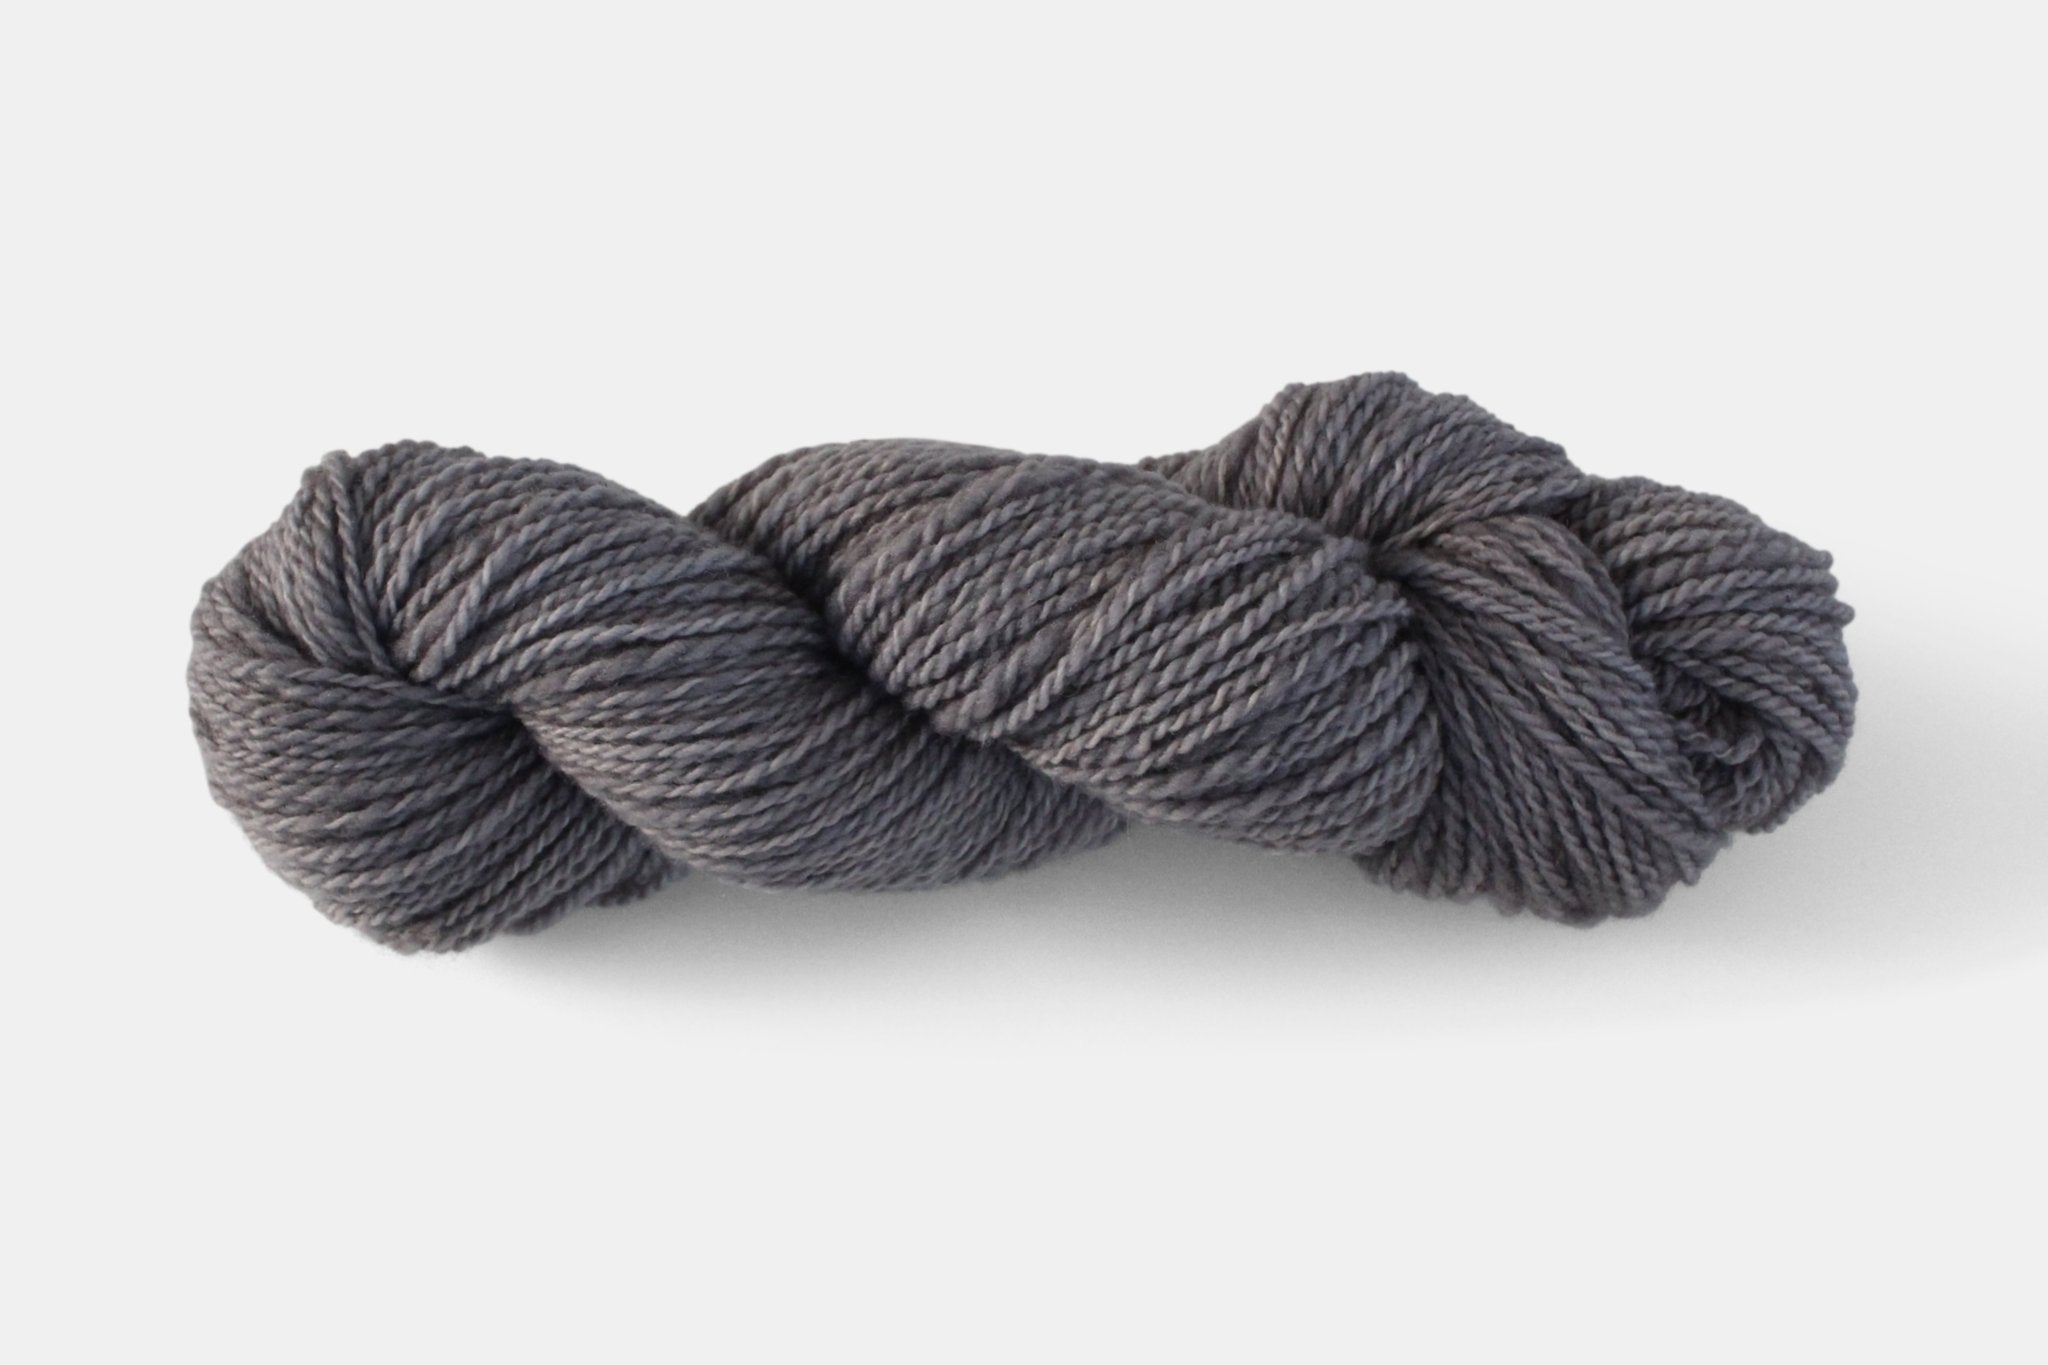 Fleece and Harmony Selkirk Worsted in Seagull